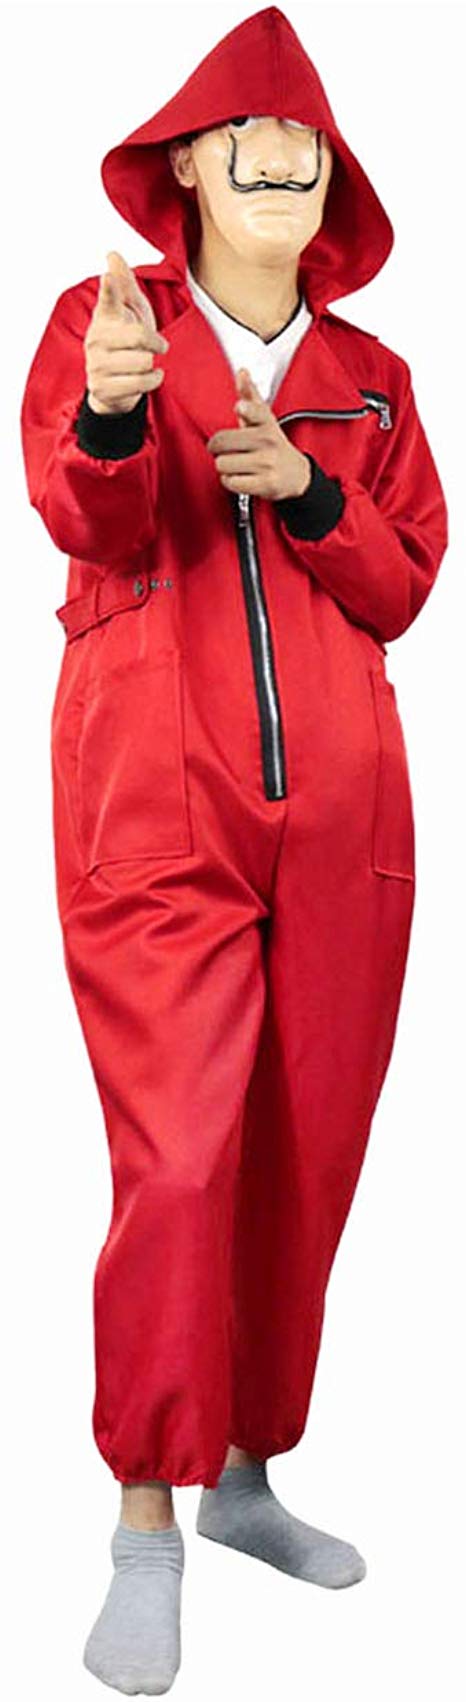 Angelaicos Unisex 2019 Dali Mask Red Costume Cosplay Party Jumpsuits